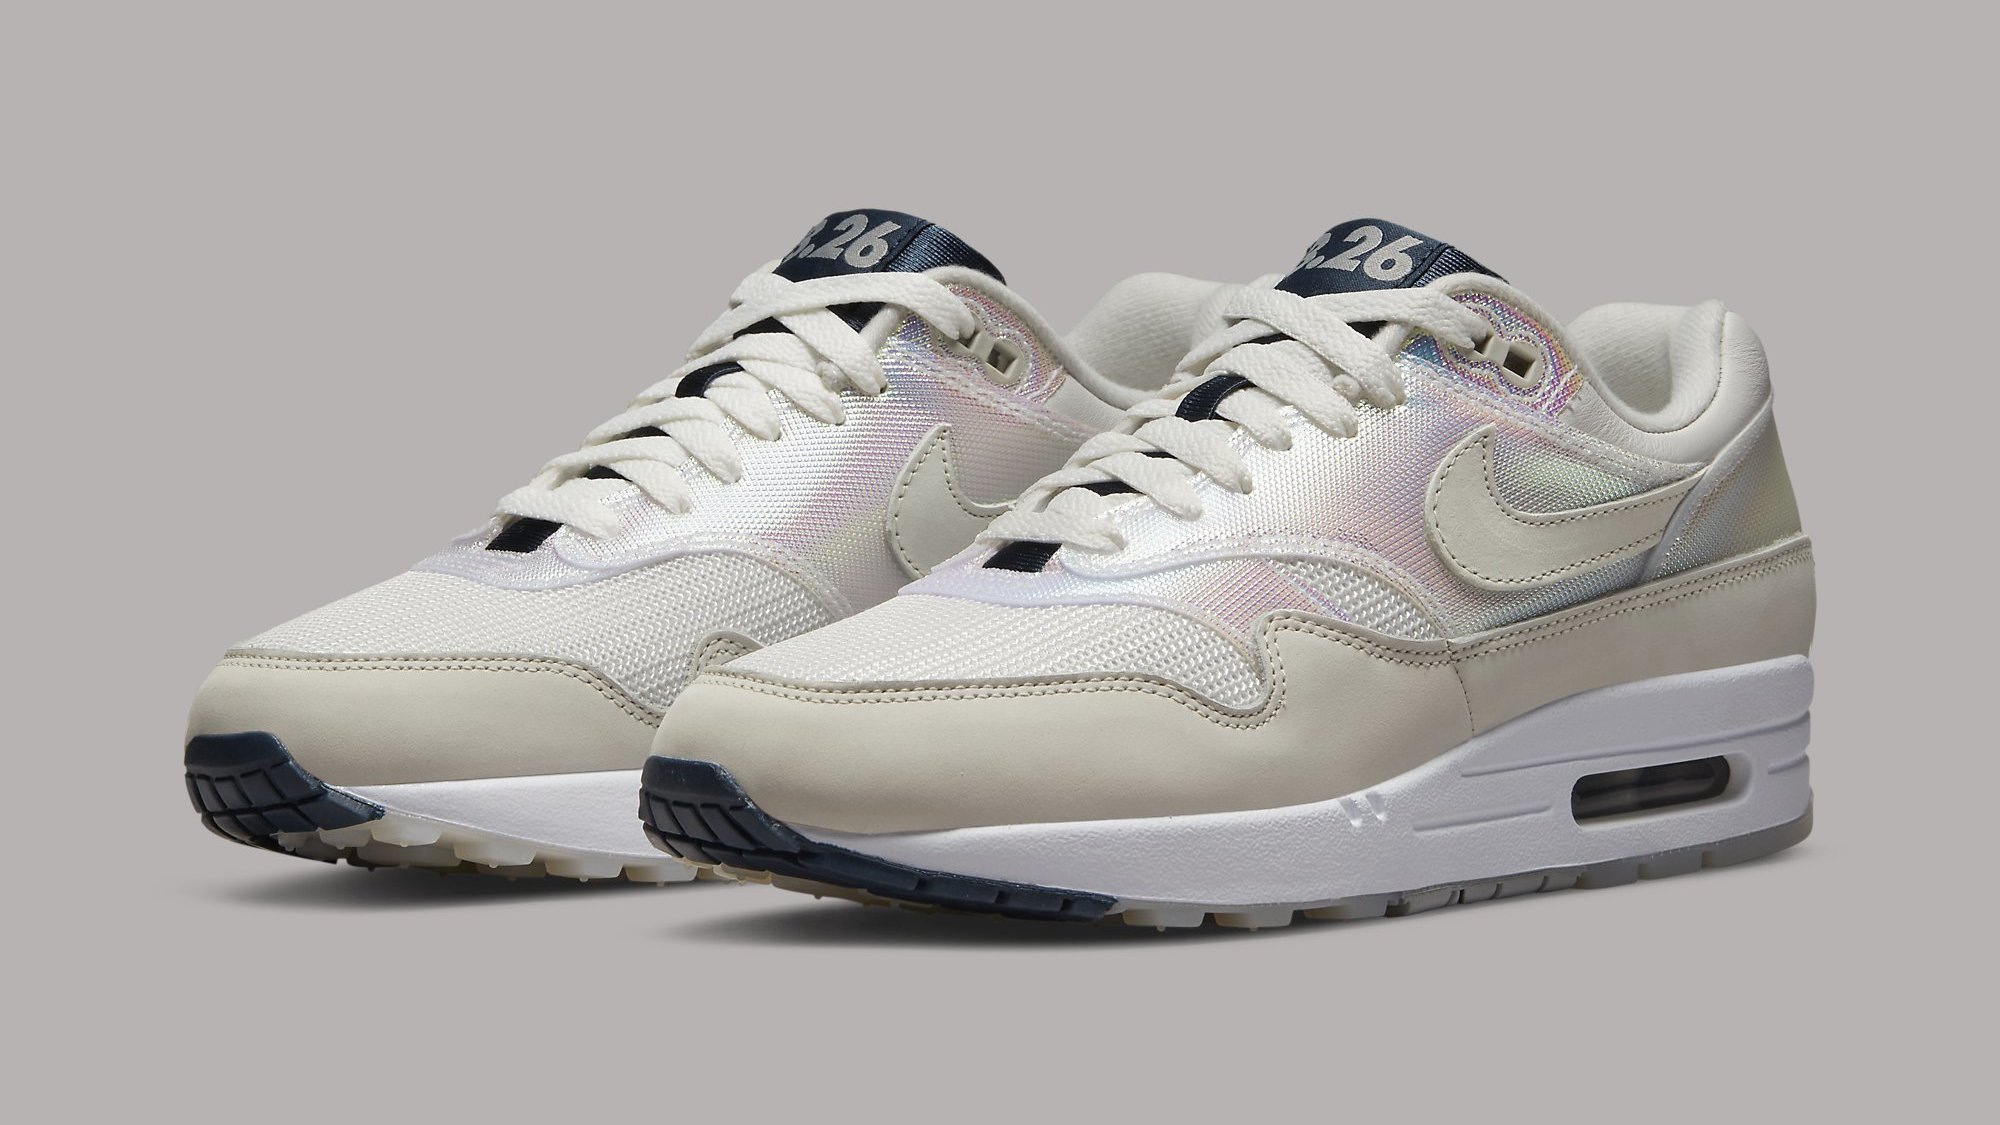 camera melk wit In beweging Nike Air Max 1 'La Ville Lumière' 2022 Release Date DQ9326 100 | Sole  Collector